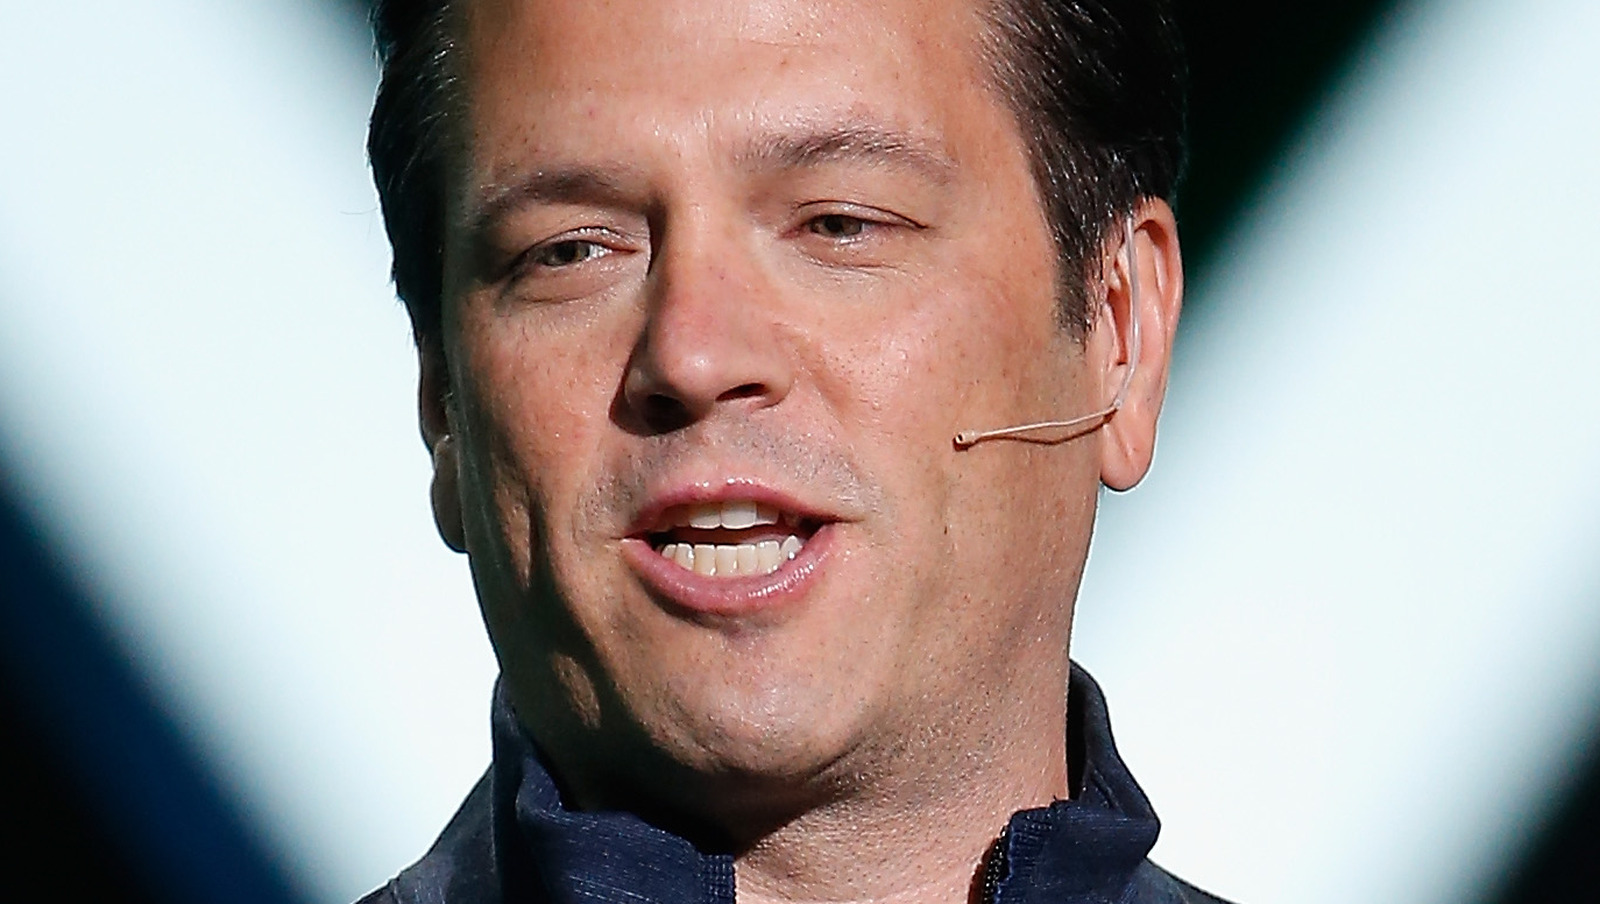 Microsoft: Phil Spencer Reveals the Company Is Working on Xbox